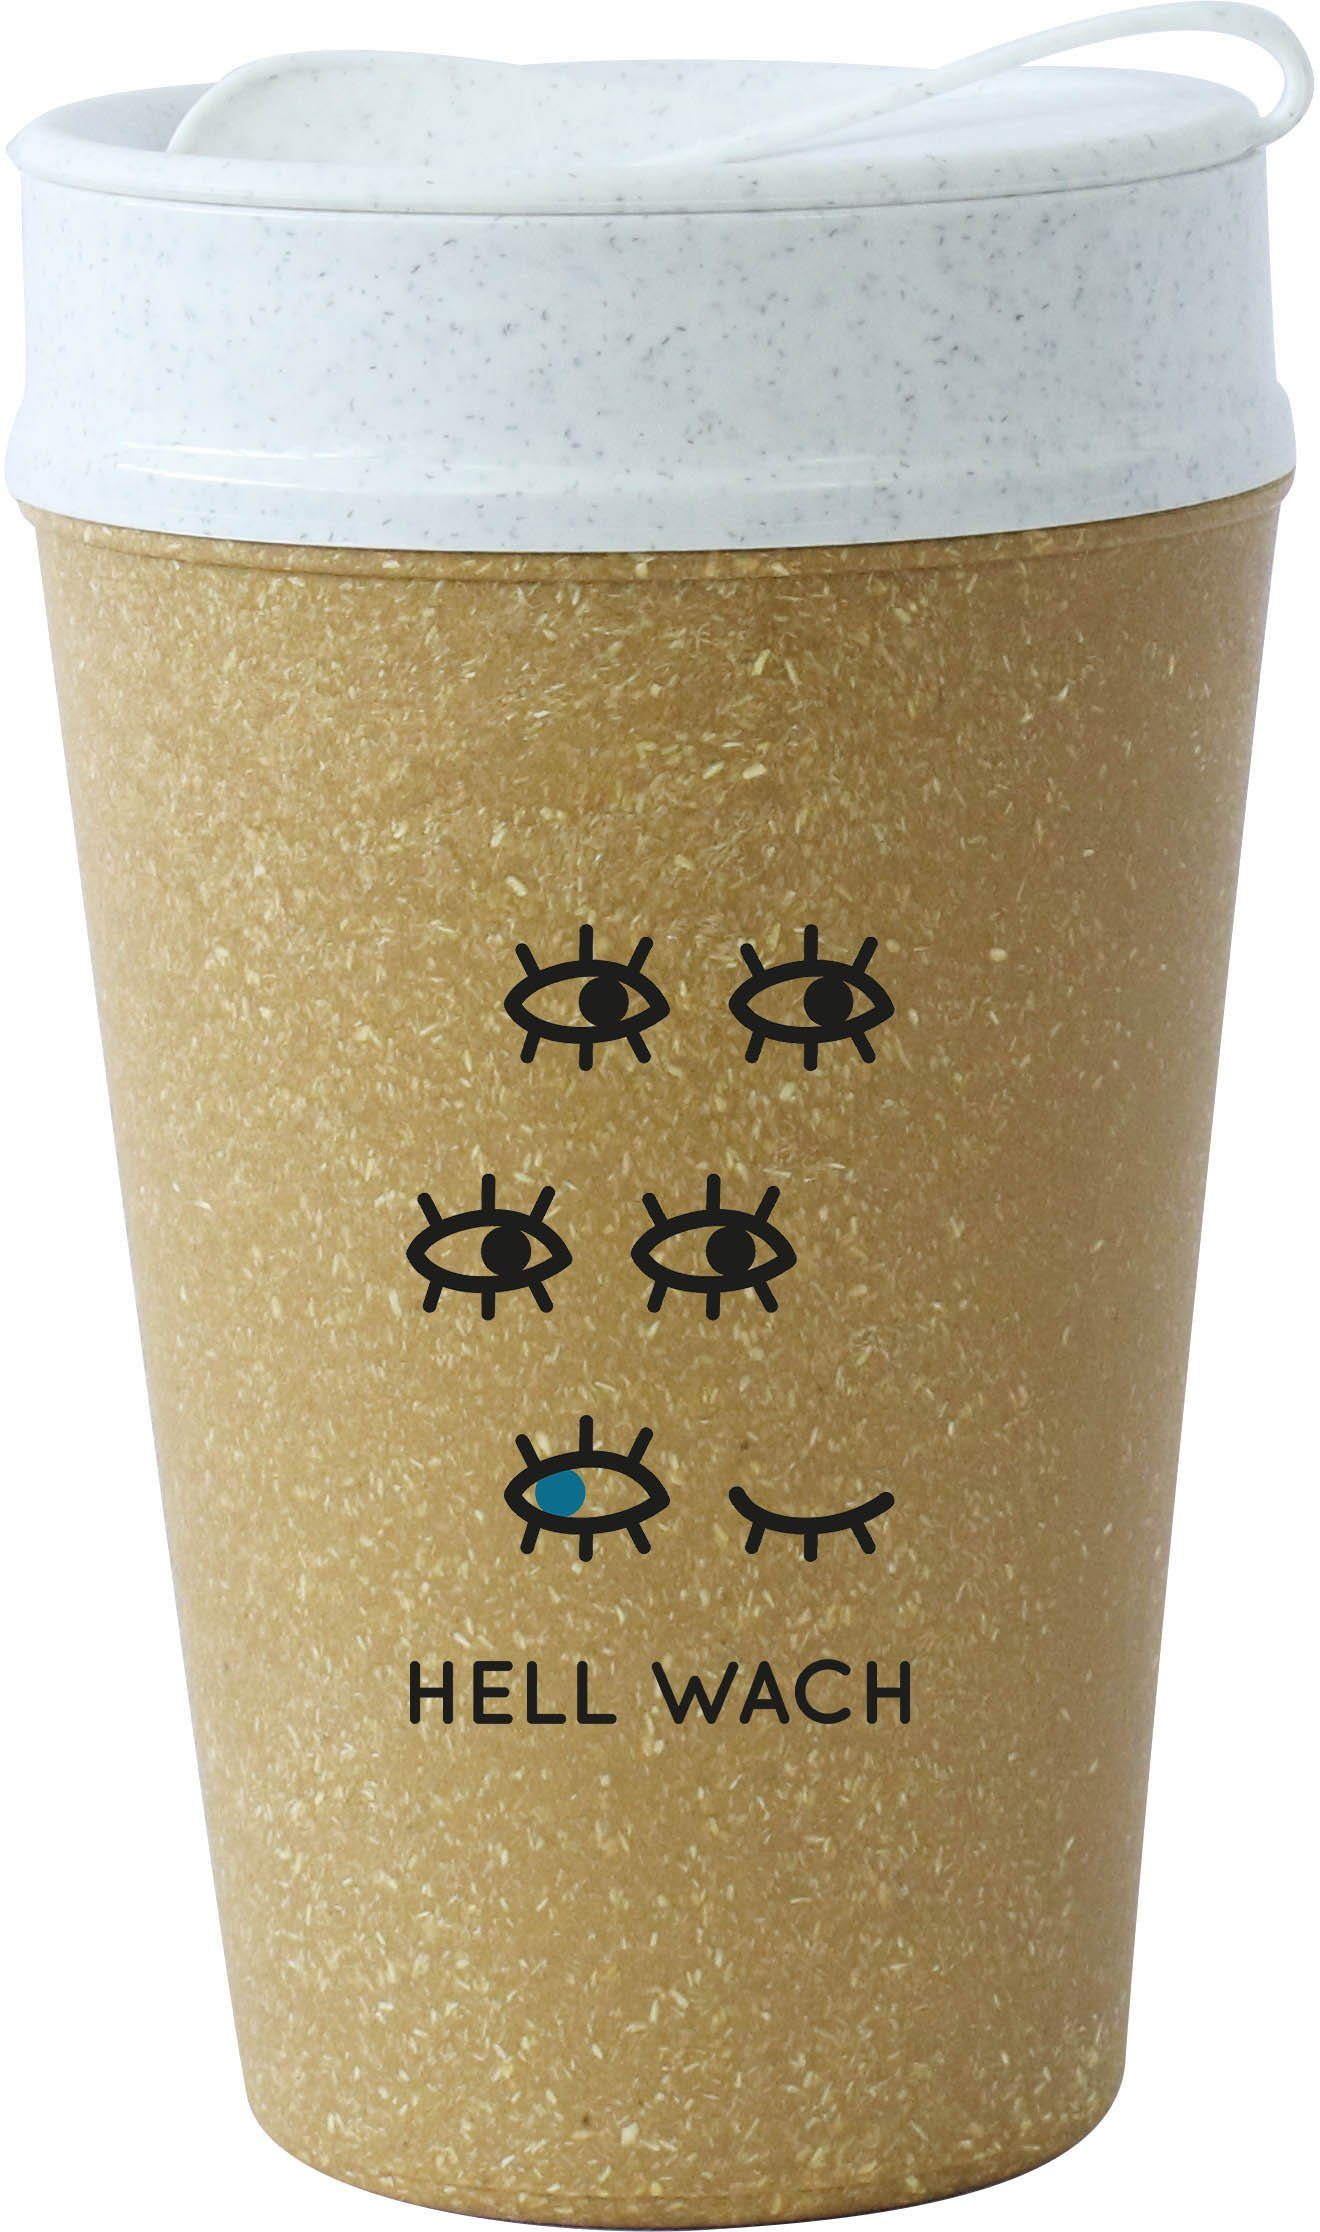 biobasiertes Holz, Kunststoff, Coffee-to-go-Becher Material,doppelwandig,melaminfrei,recycelbar,400ml GO WACH, 100% TO HELL ISO KOZIOL